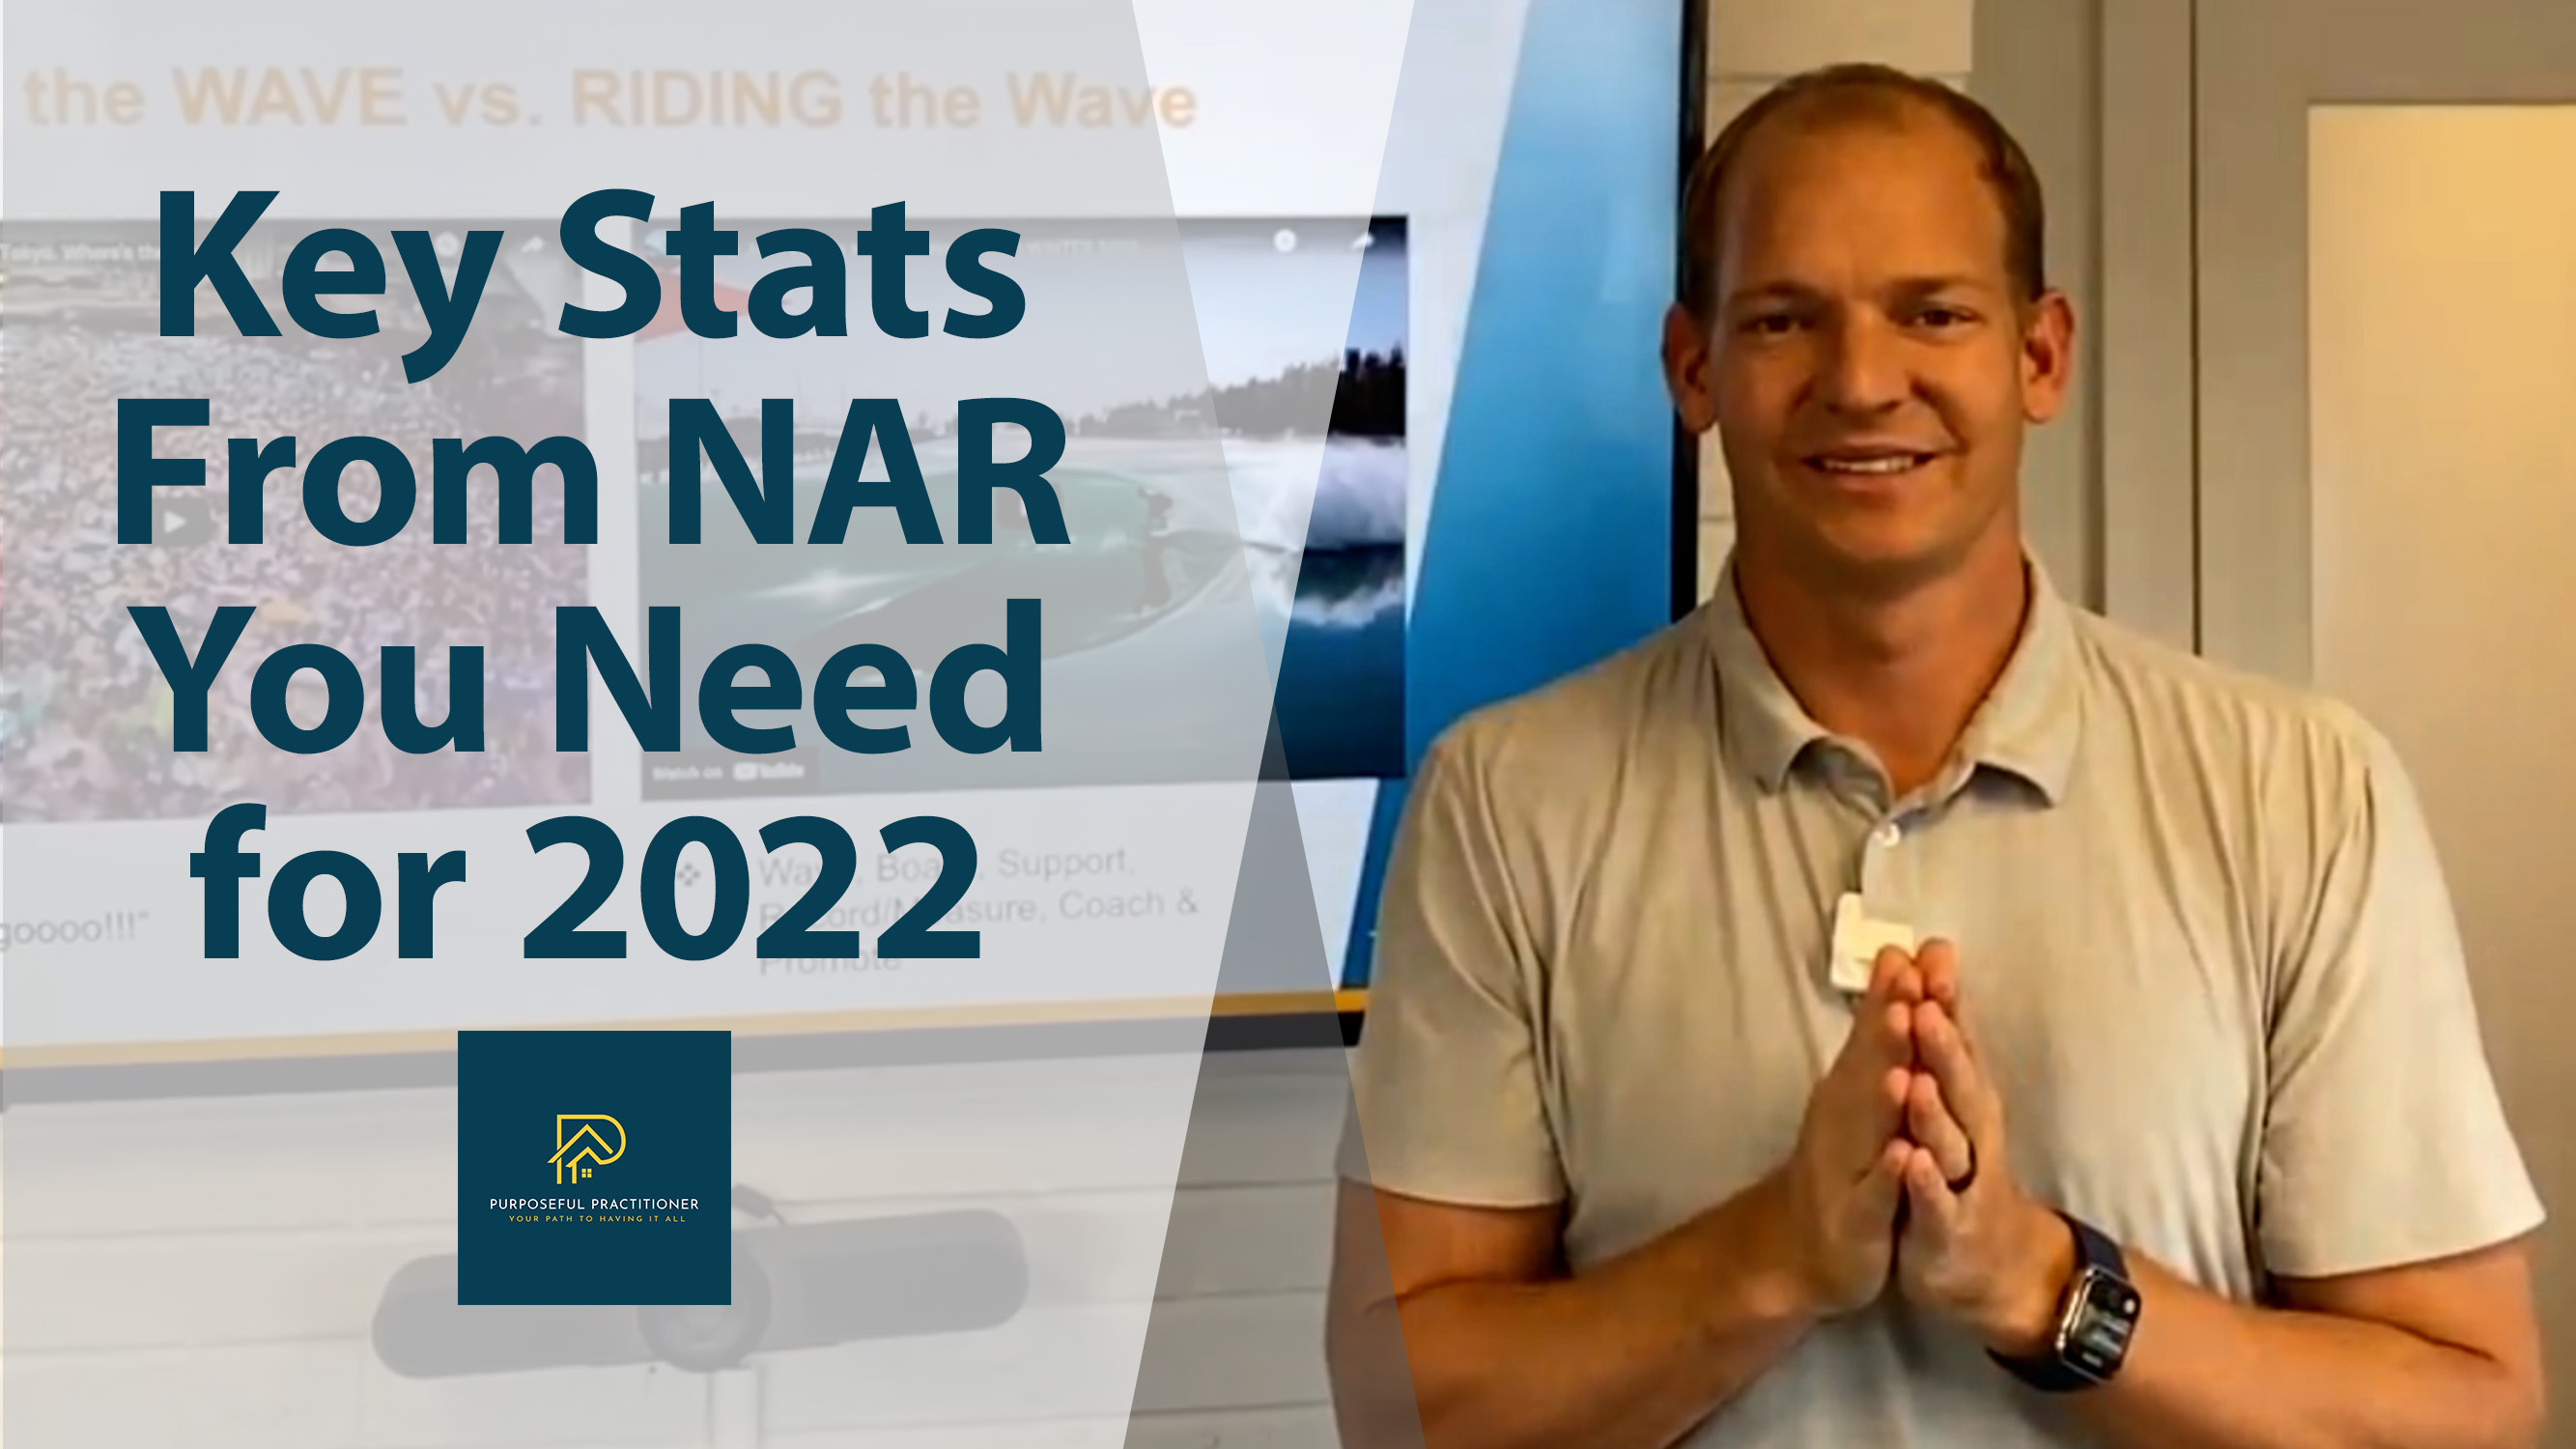 Key Stats From NAR You Need for 2022